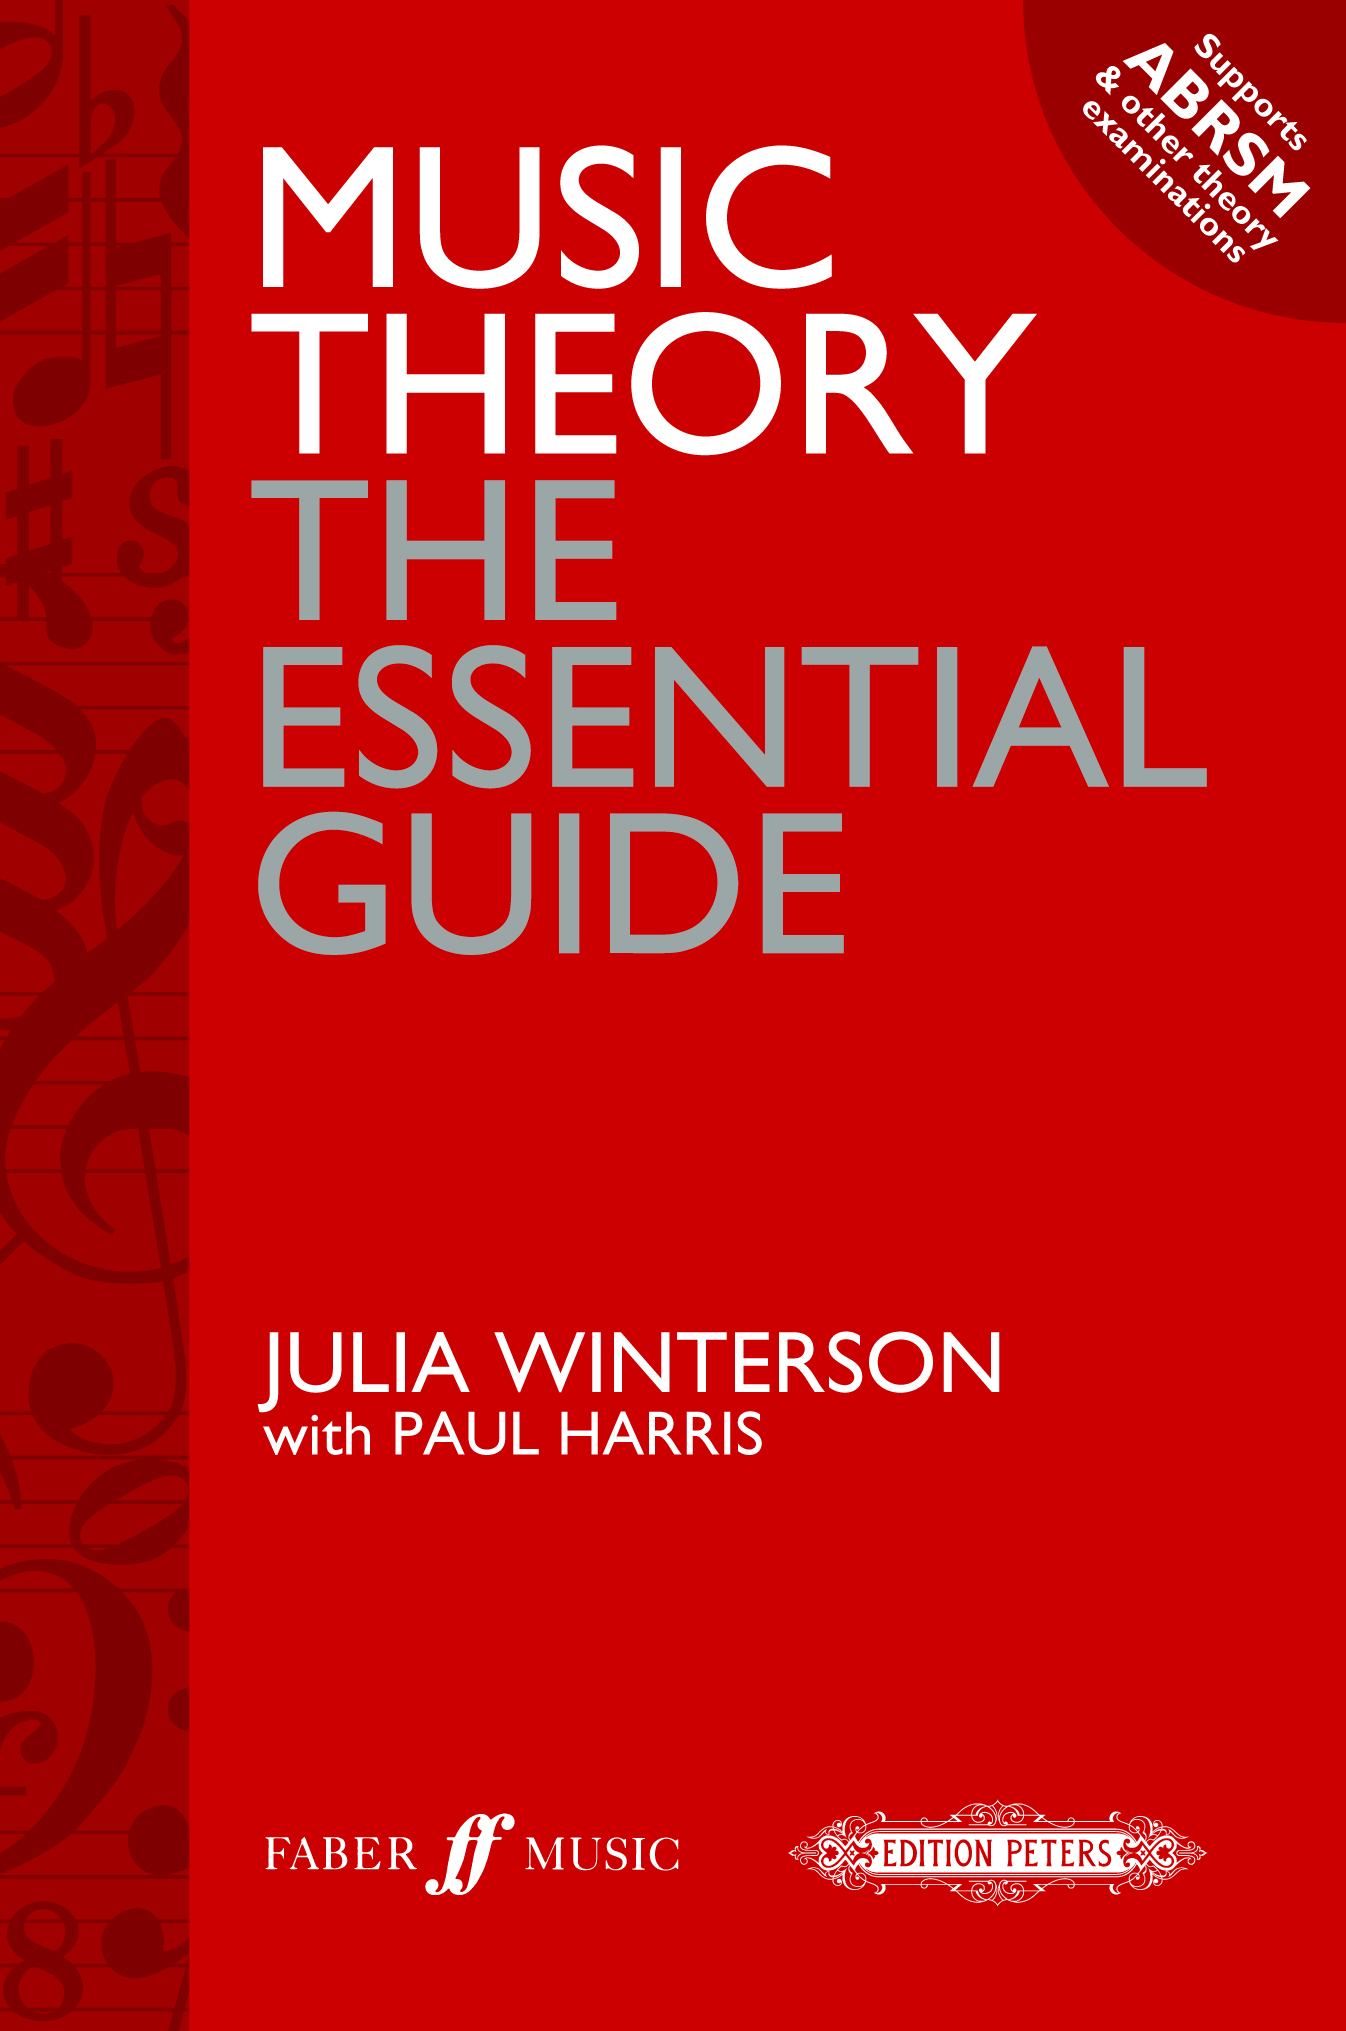 Music Theory : The Essential Guide (WINTERSON JULIA / HARRIS PAUL)